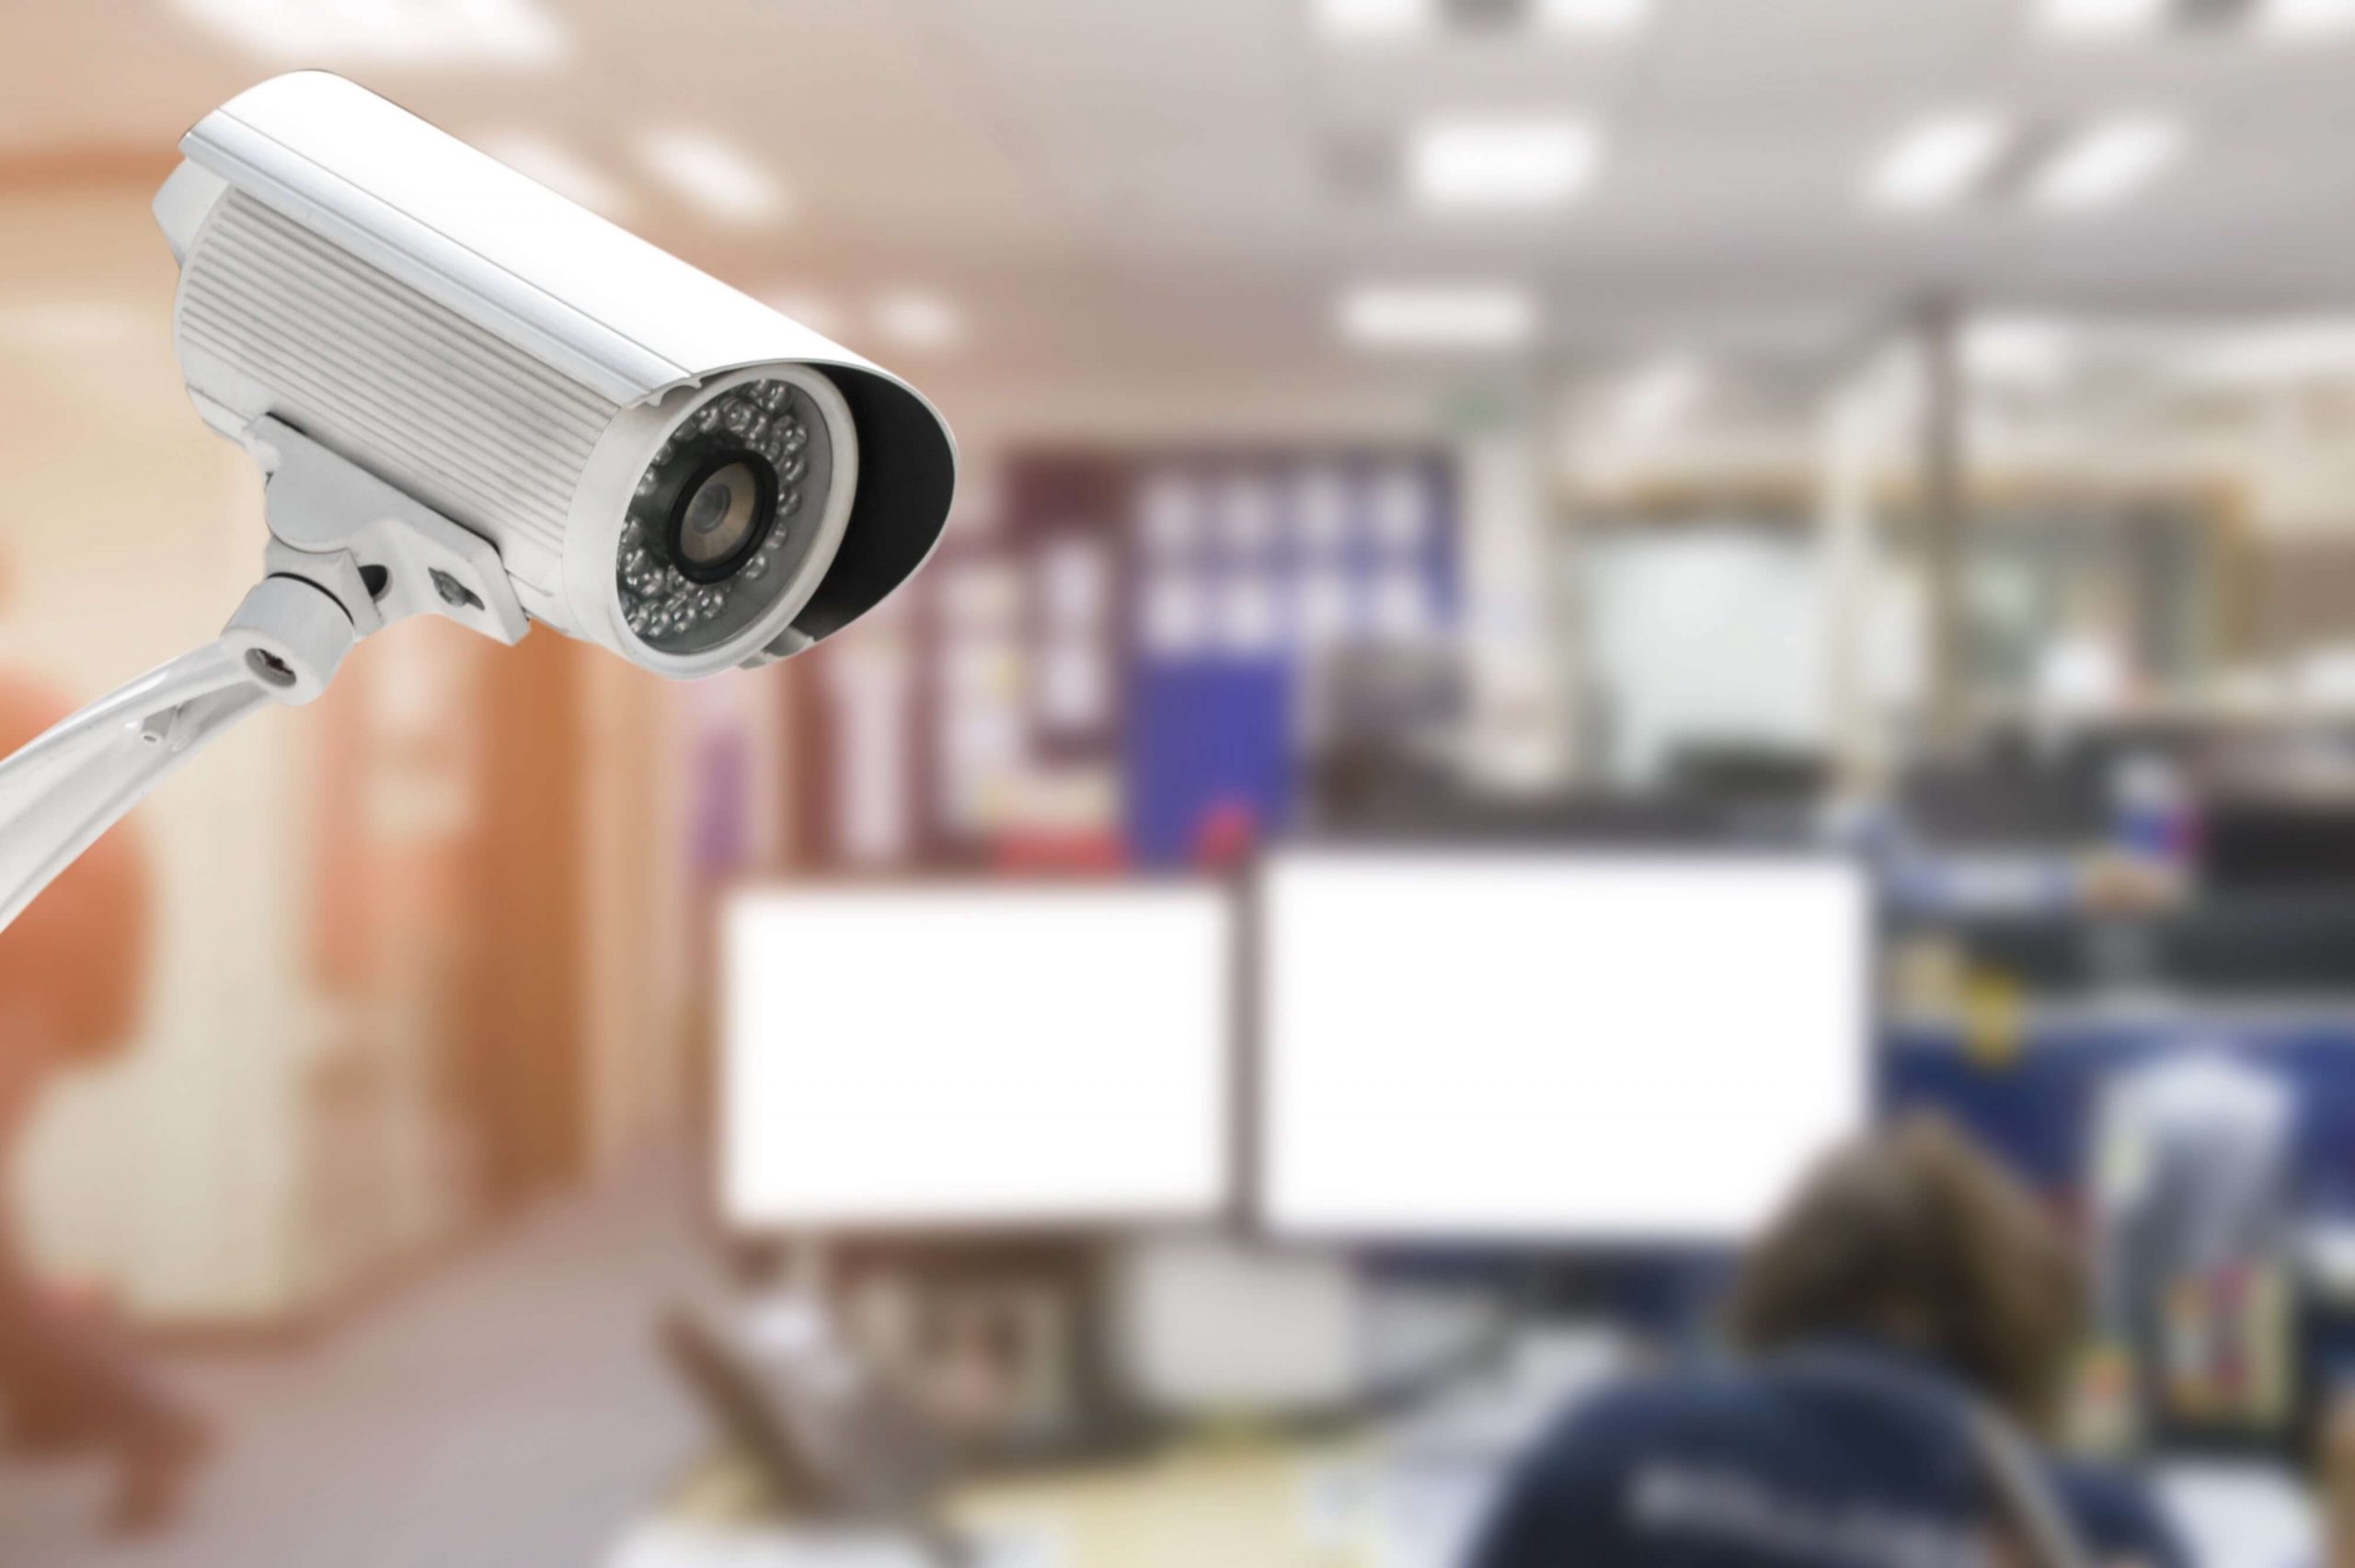 Top features you need for your business’s video security